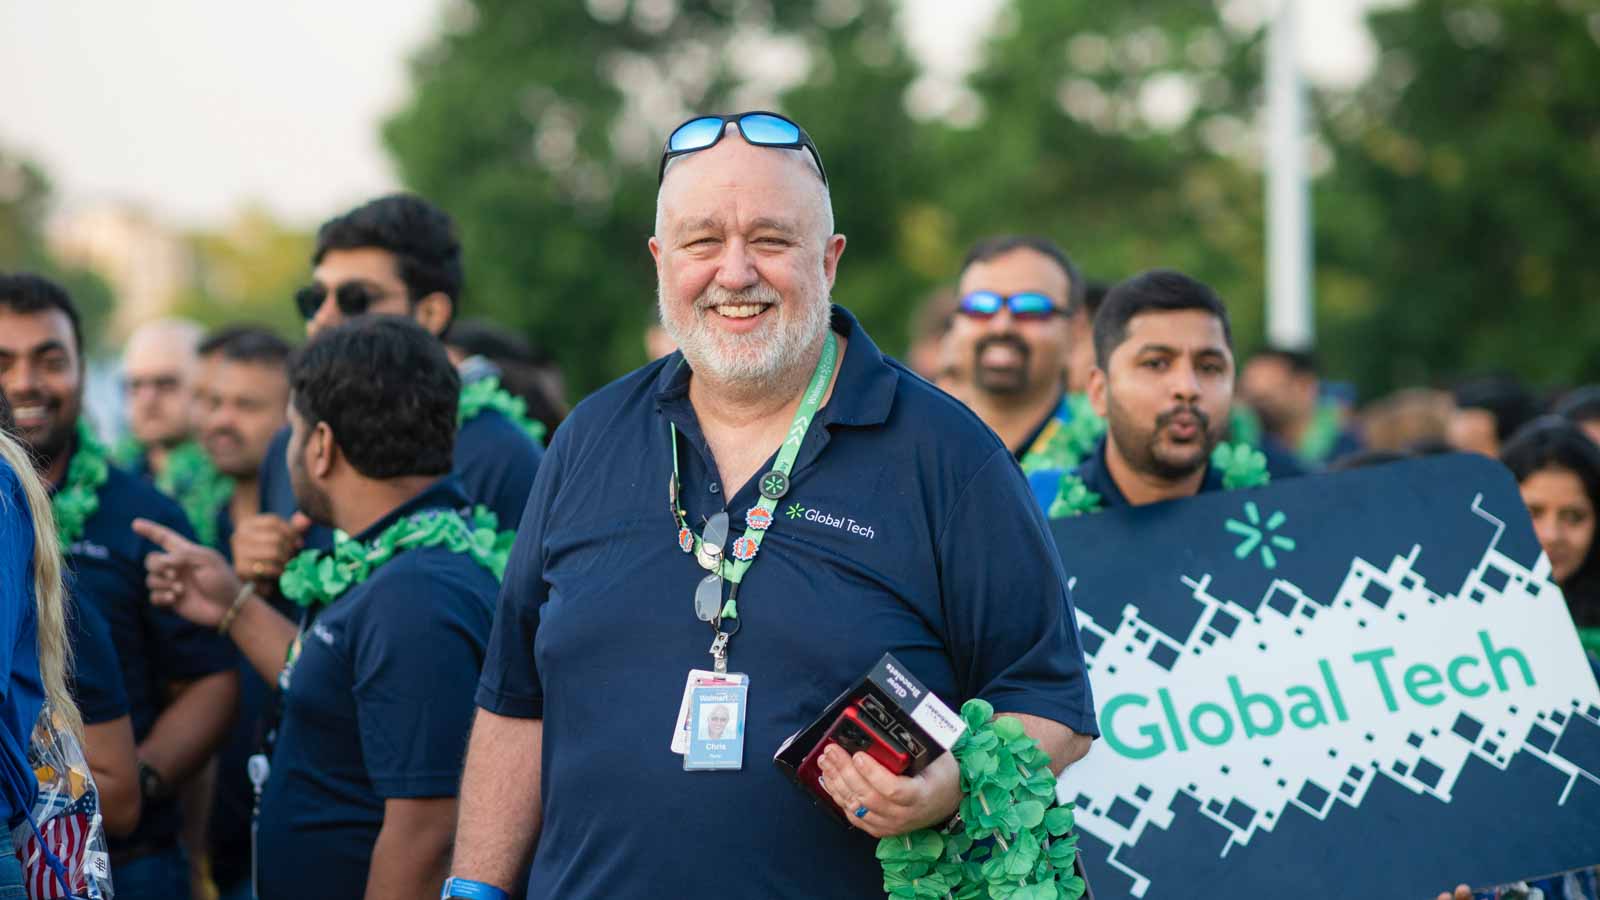 Associate on the Global Tech team is seen smiling at the camera. He fellow Global Tech associates are seen in the background with their sign that reads "Global Tech".